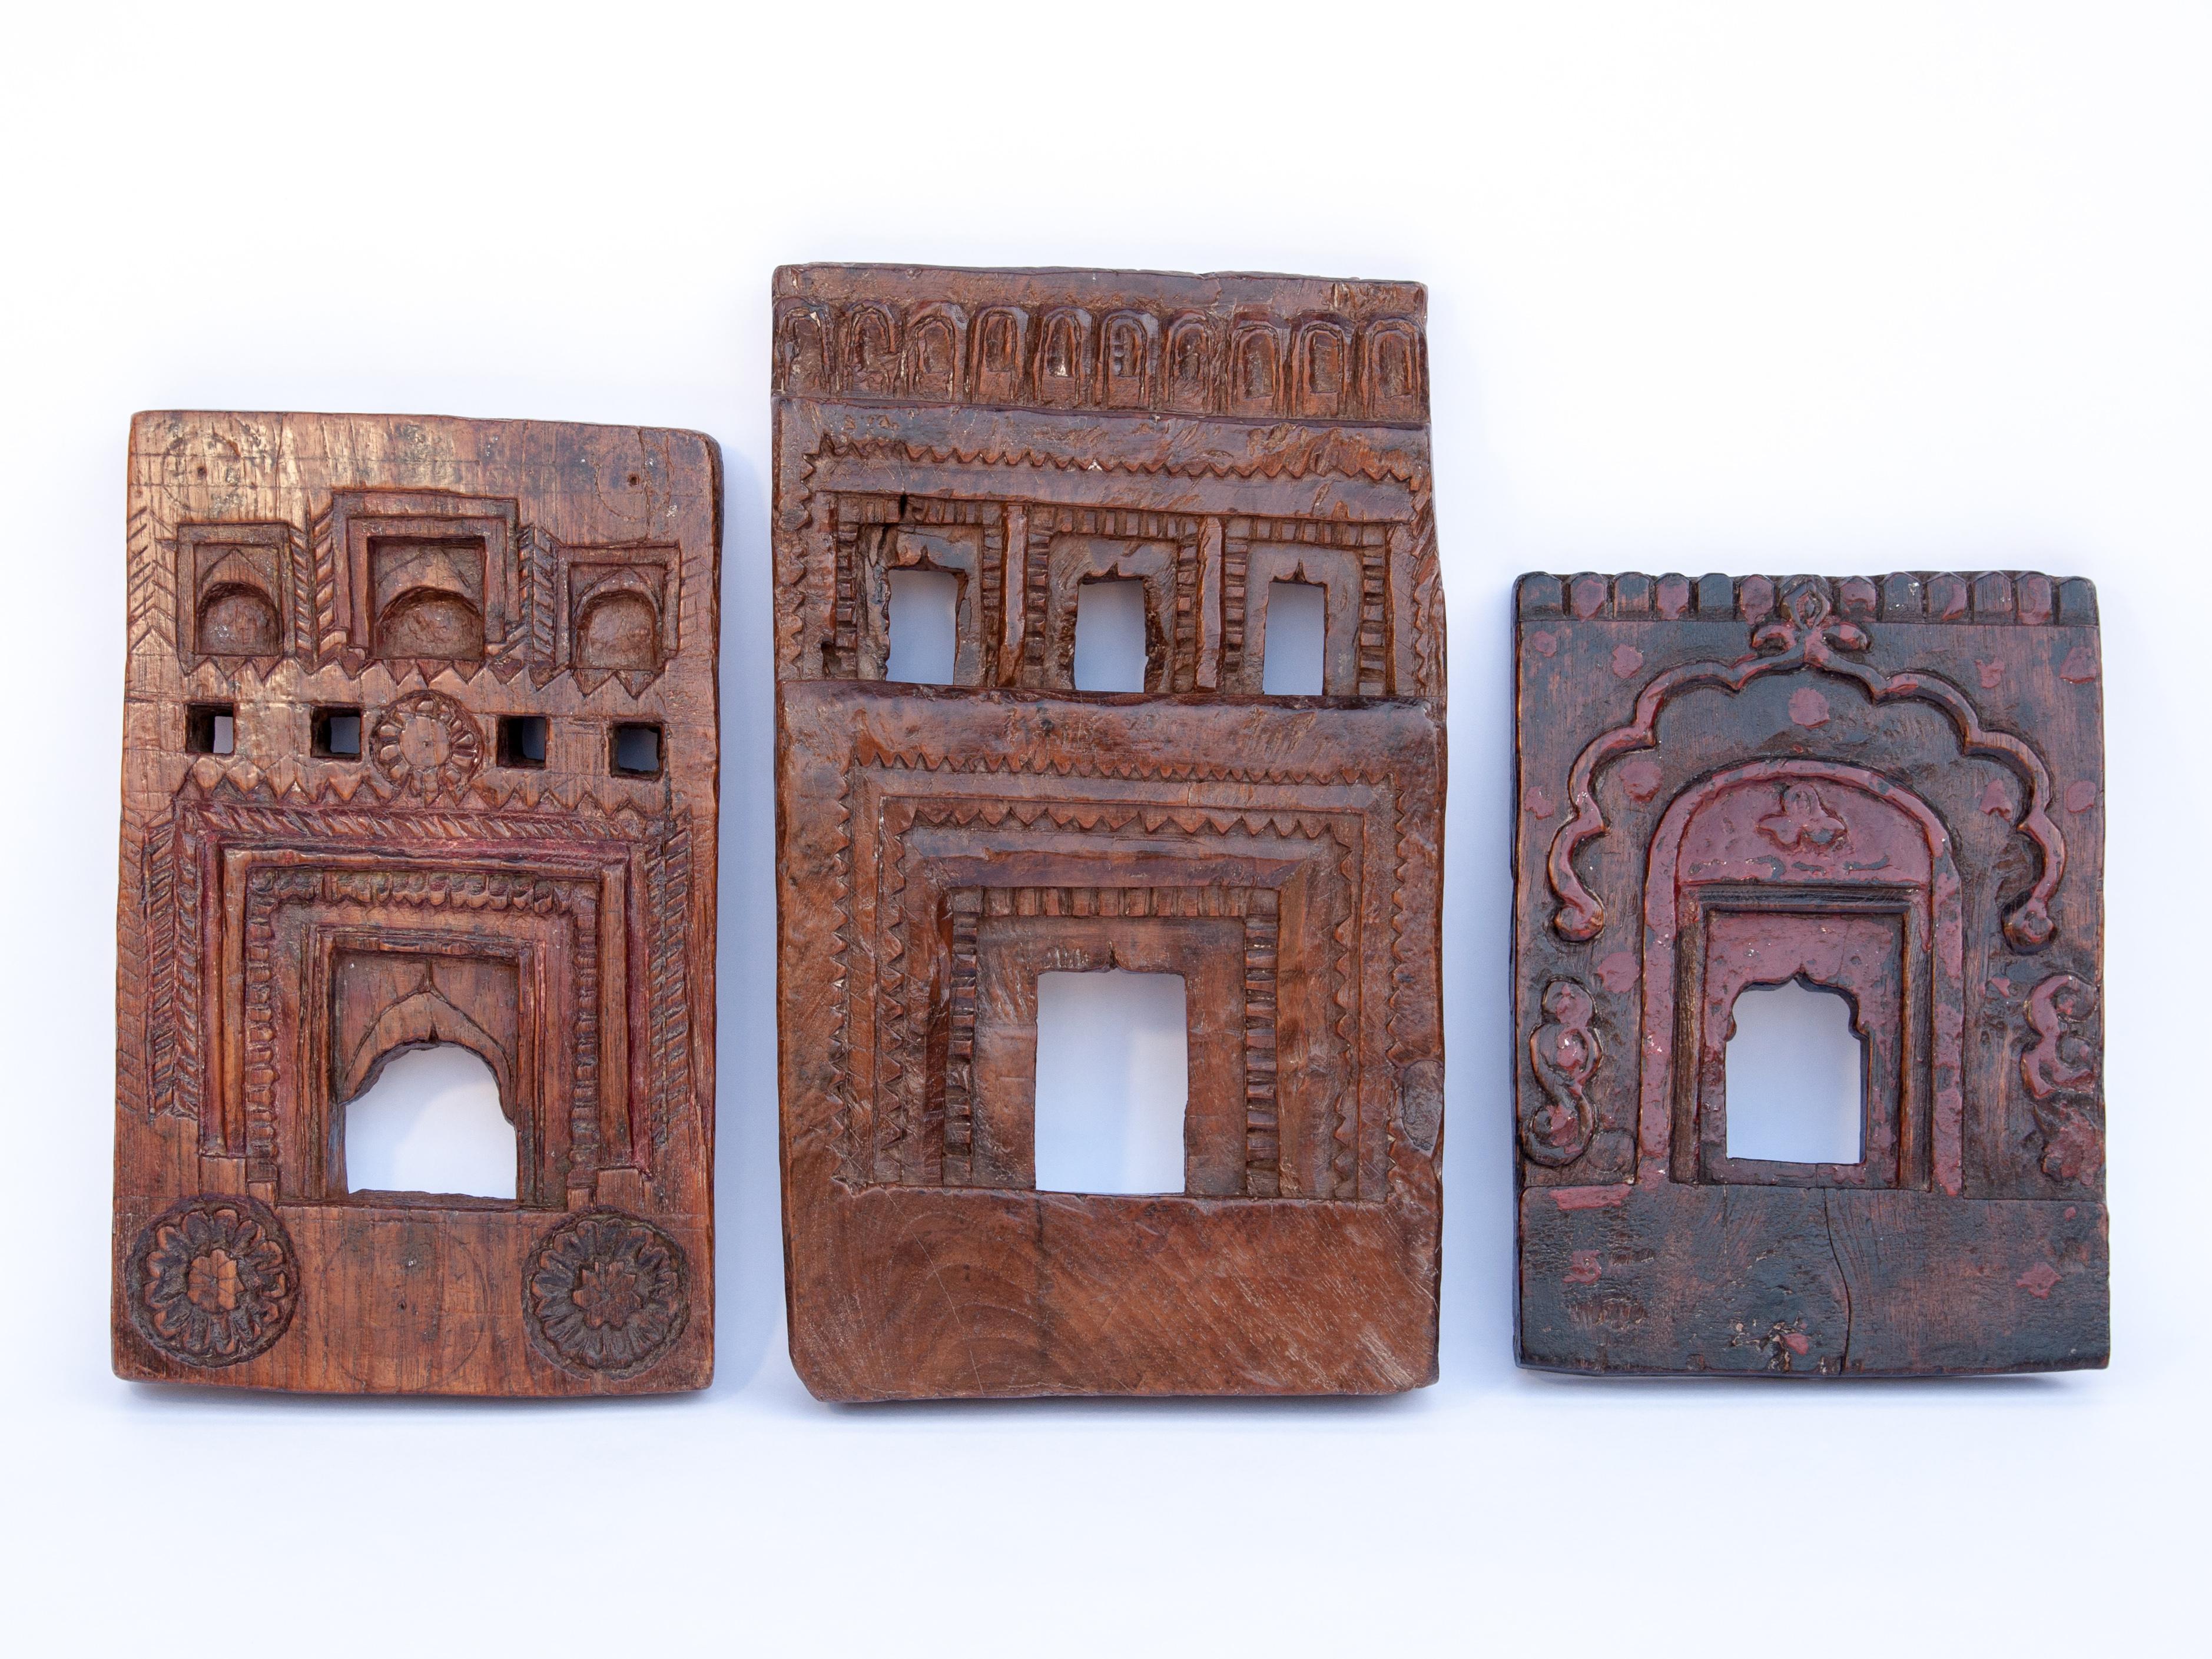 Set of 3 Vintage Carved Wood Votive or Picture Frames, Mid-20th Century, India.